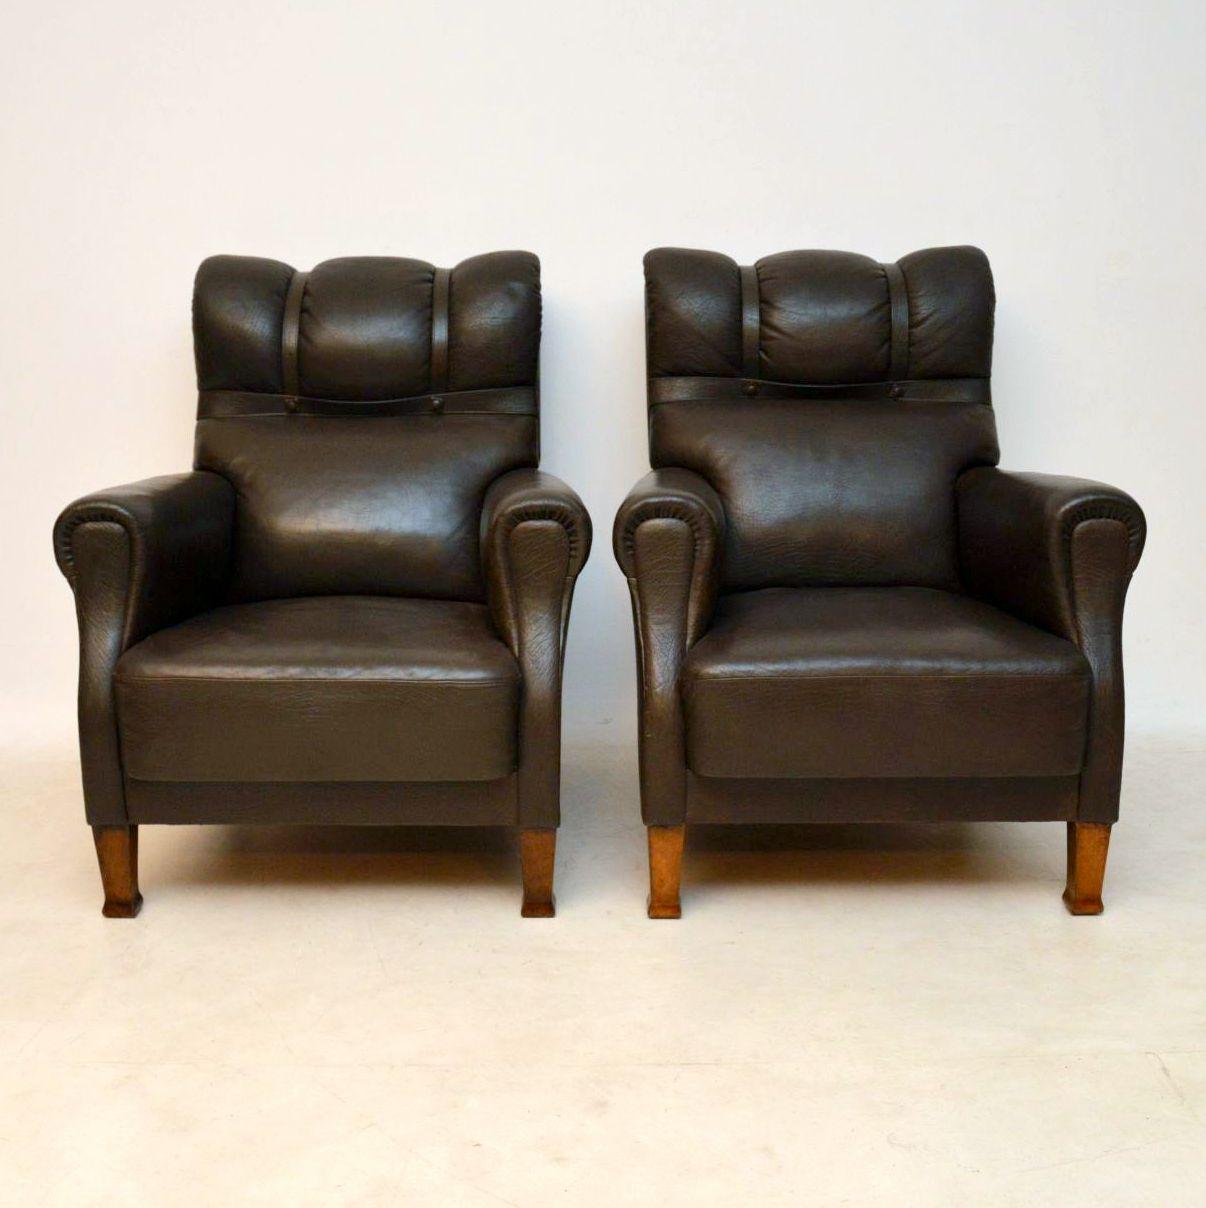 This pair of antique leather Swedish club armchairs have great character and are very comfortable too. The leather is all original along with leather straps and studs. I love the original color on the leather that has naturally aged. The leather is